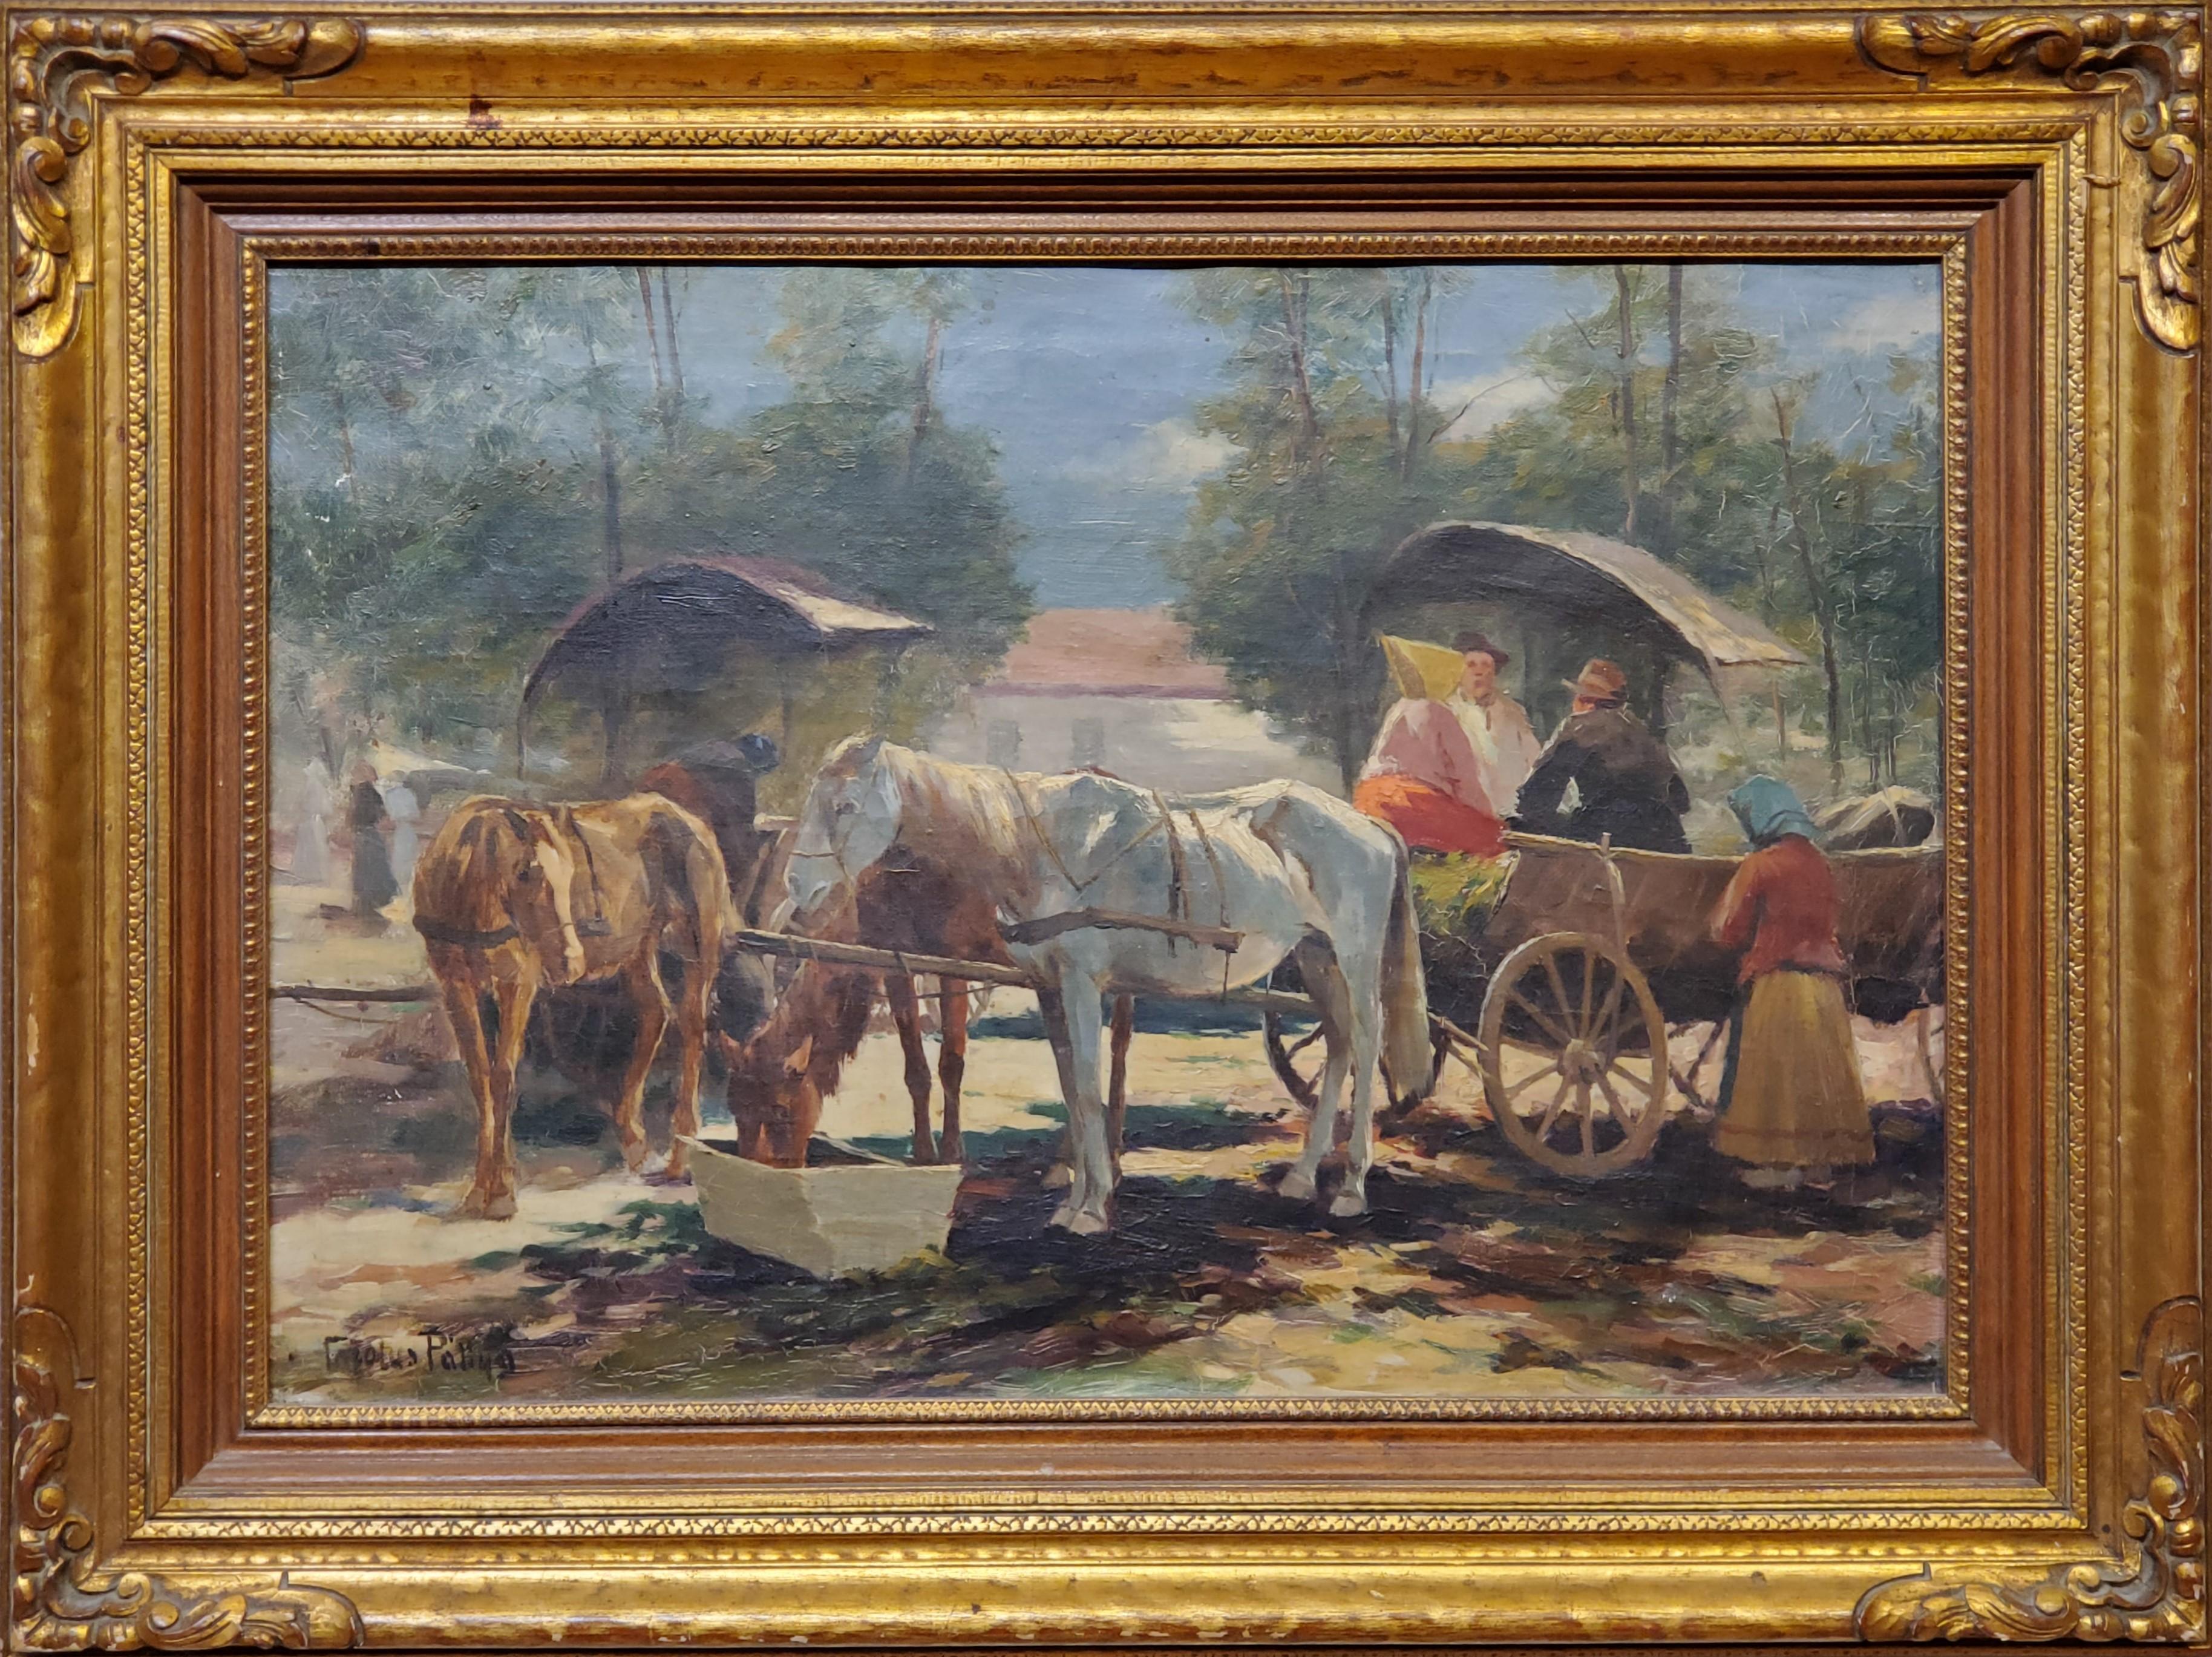 Horse and Carriage an Oil Painting signed by Carolus Pallya.

Hungarian 1875-1930.

Oil on canvas, this antique painting measures 13.5" tall by 19.5" wide.

In the frame, this landscape painting of horses and carriage measures 19" tall by 25" wide.